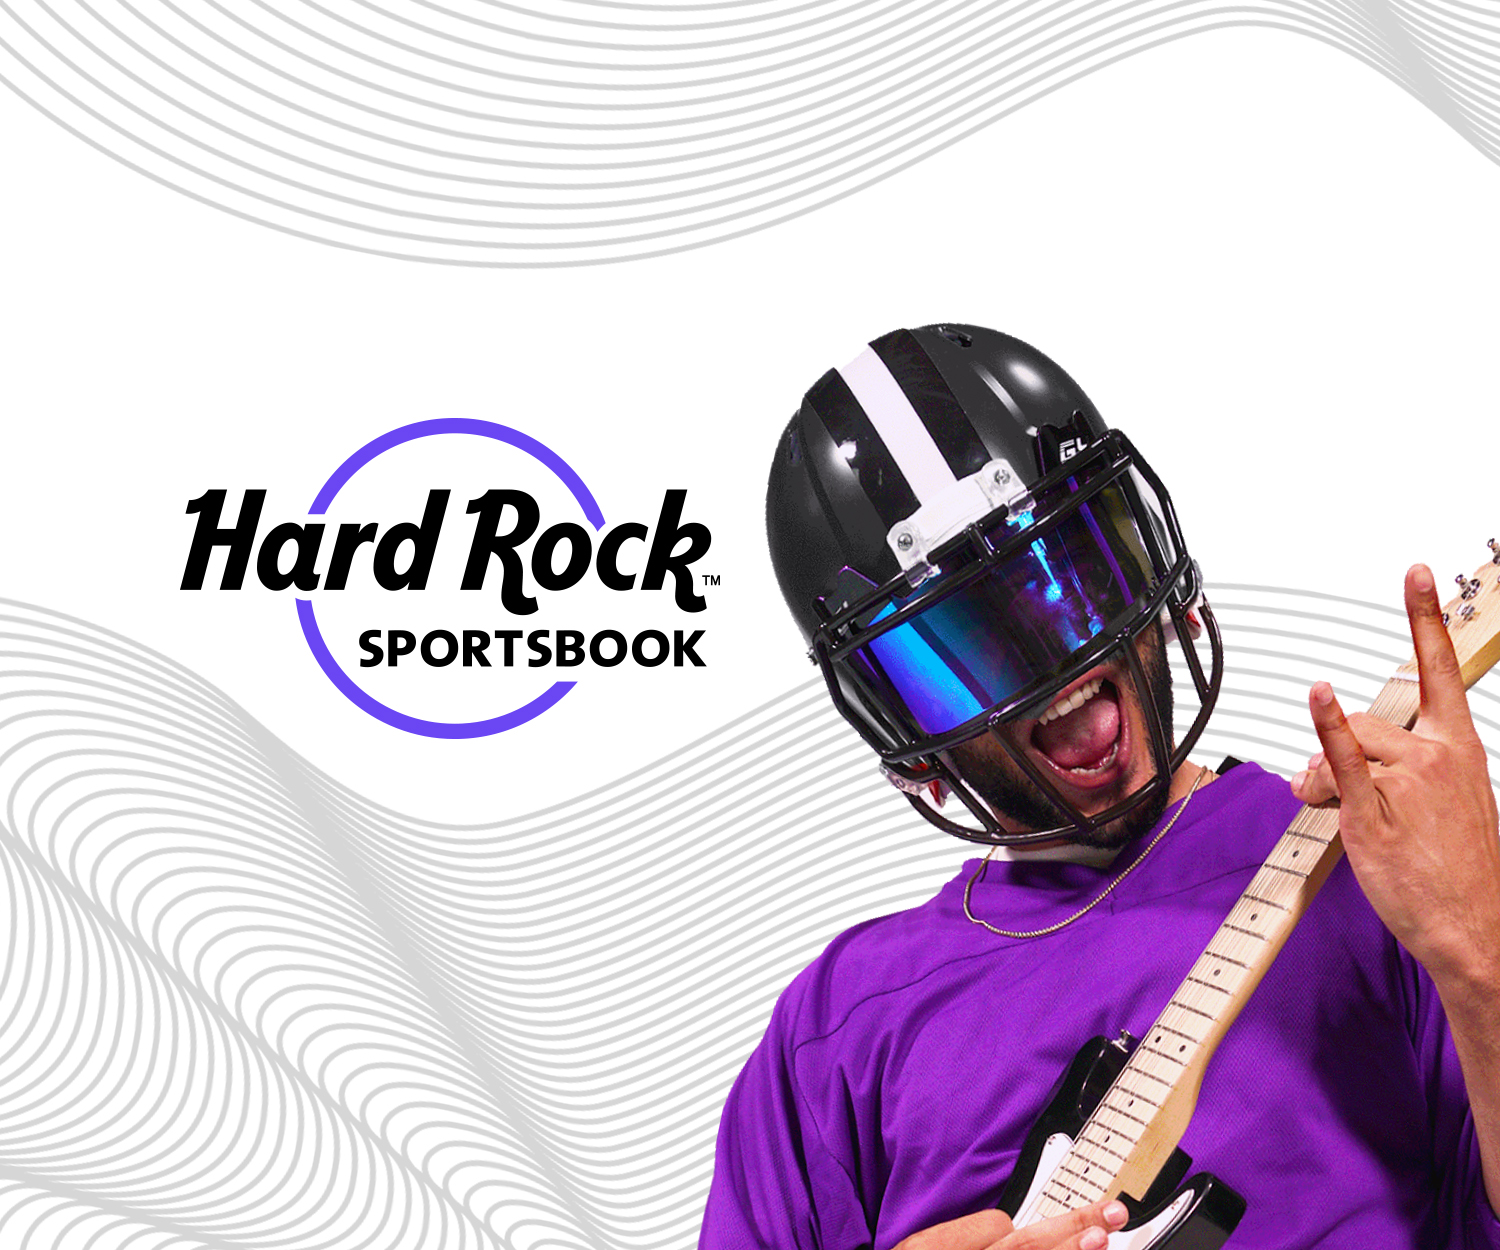 Hard Rock Sportsbook Expands to Ind., Tenn.